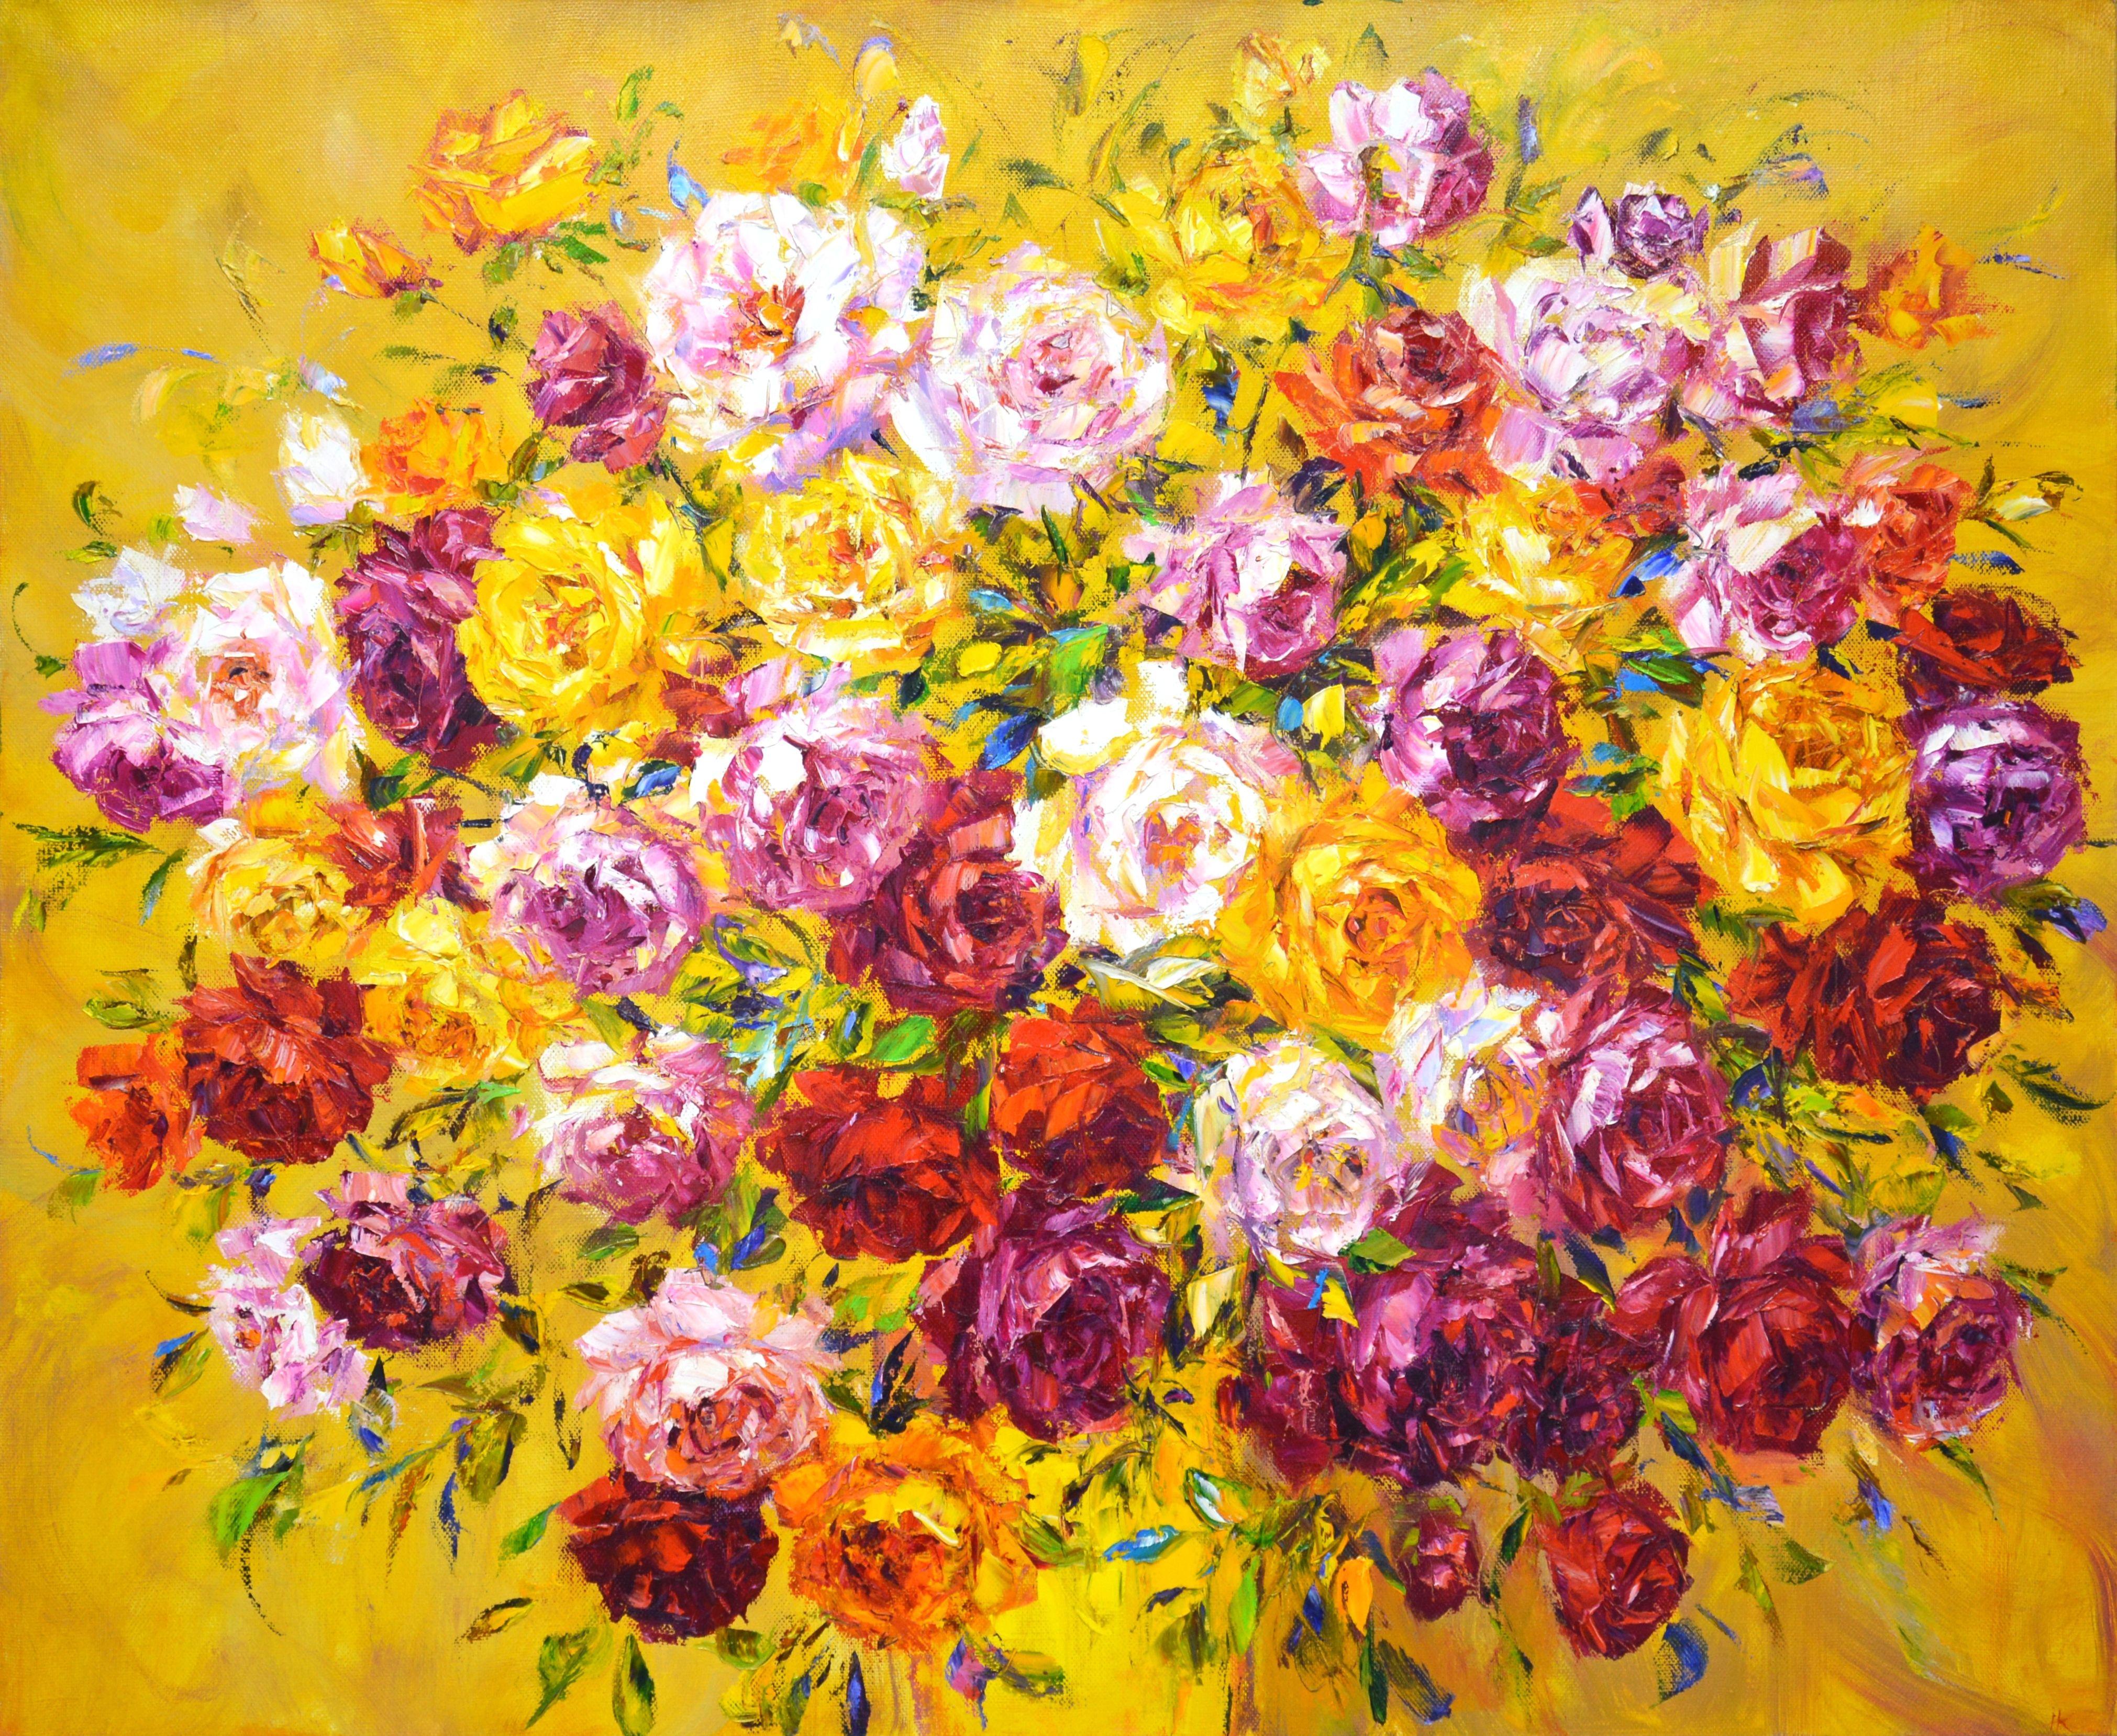 Large bouquet of roses 3. Roses: white, pink, yellow, red on an abstract yellow background. Impressionism. Made textured with a brush and palette knife to quickly convey a mood, a vivid impression. Part of an ongoing series of floral still lifes.